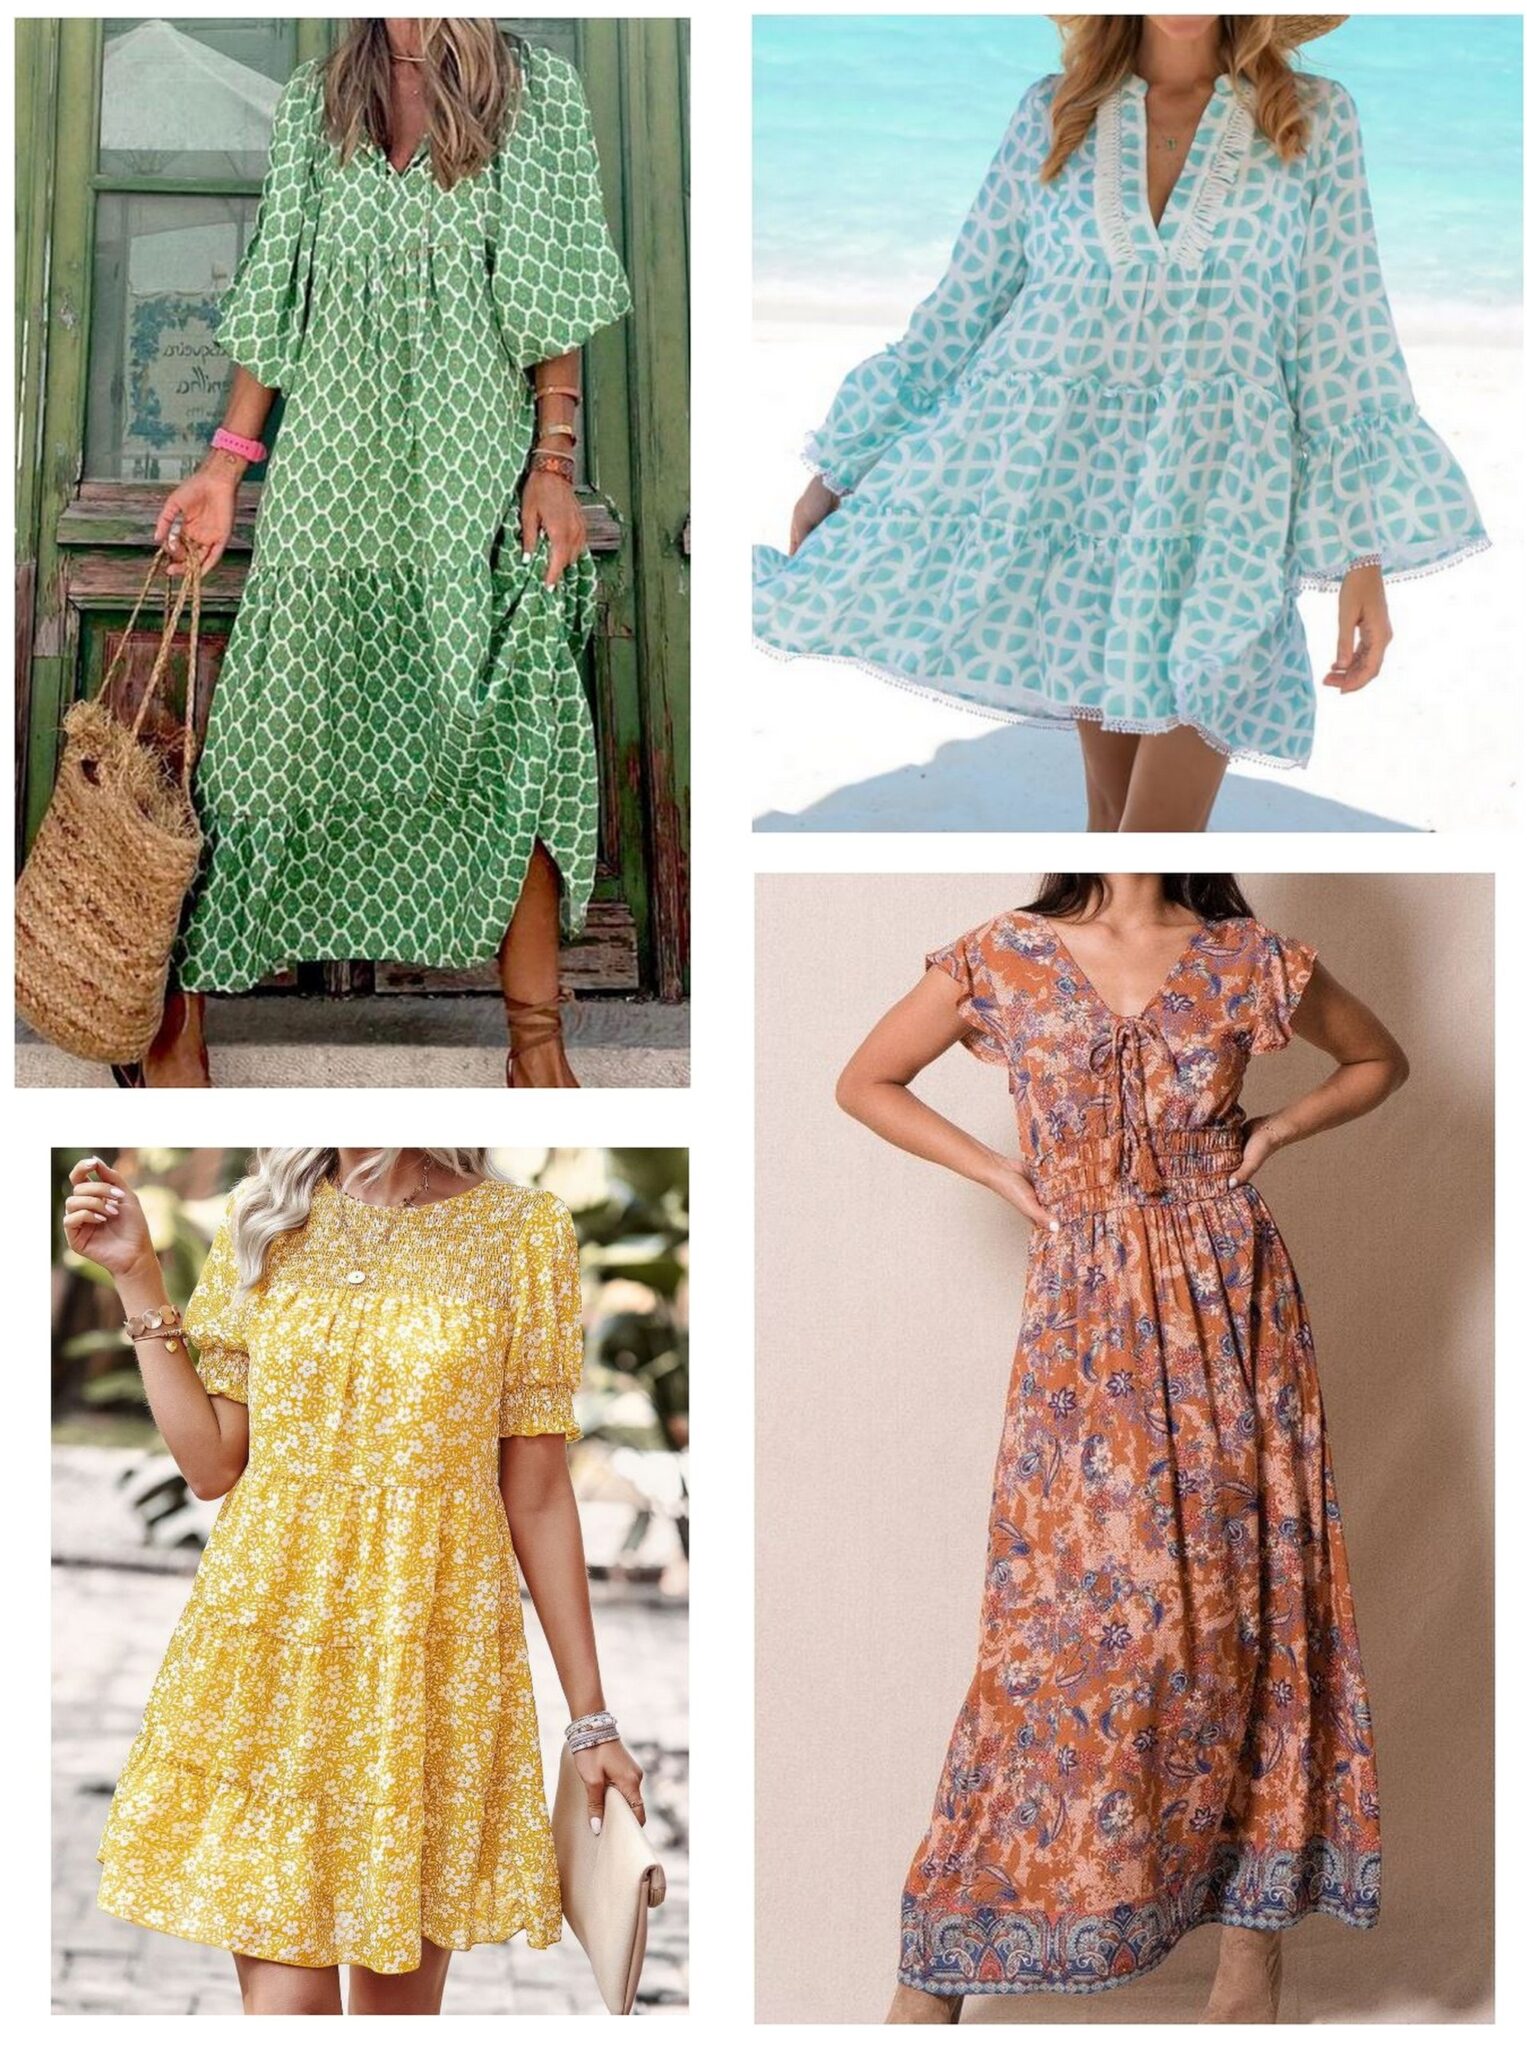 Patterned Dresses for Spring | Centsational Style